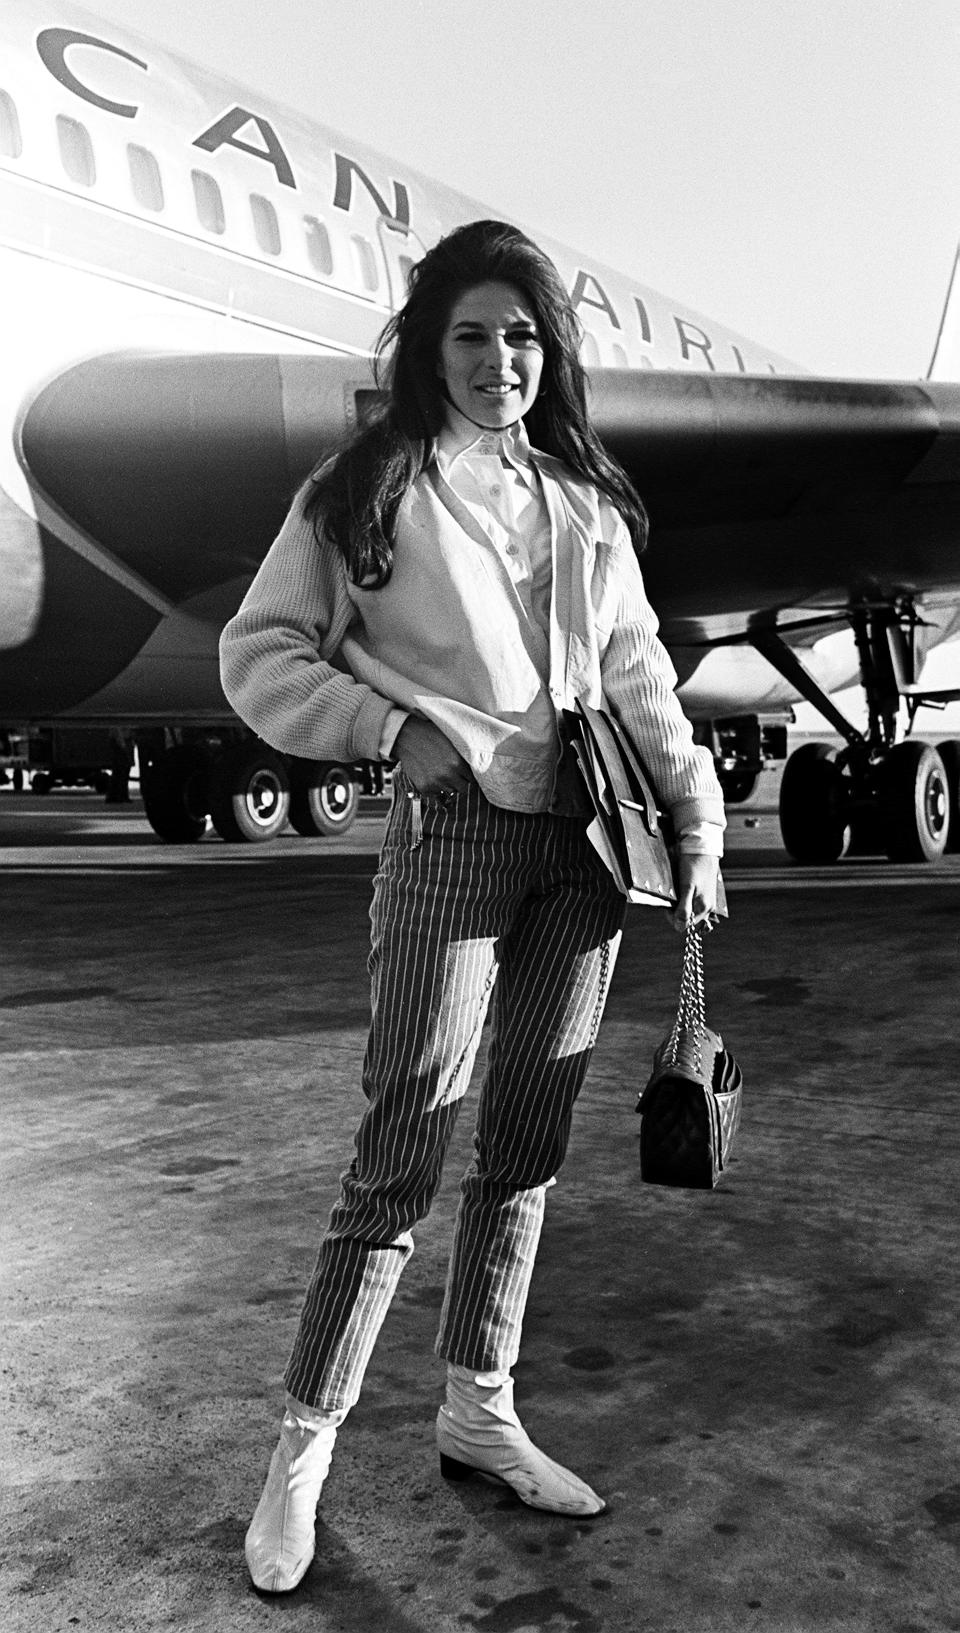 Singer Bobbie Gentry poses for photographers outside the airport in Nashville in 1967.